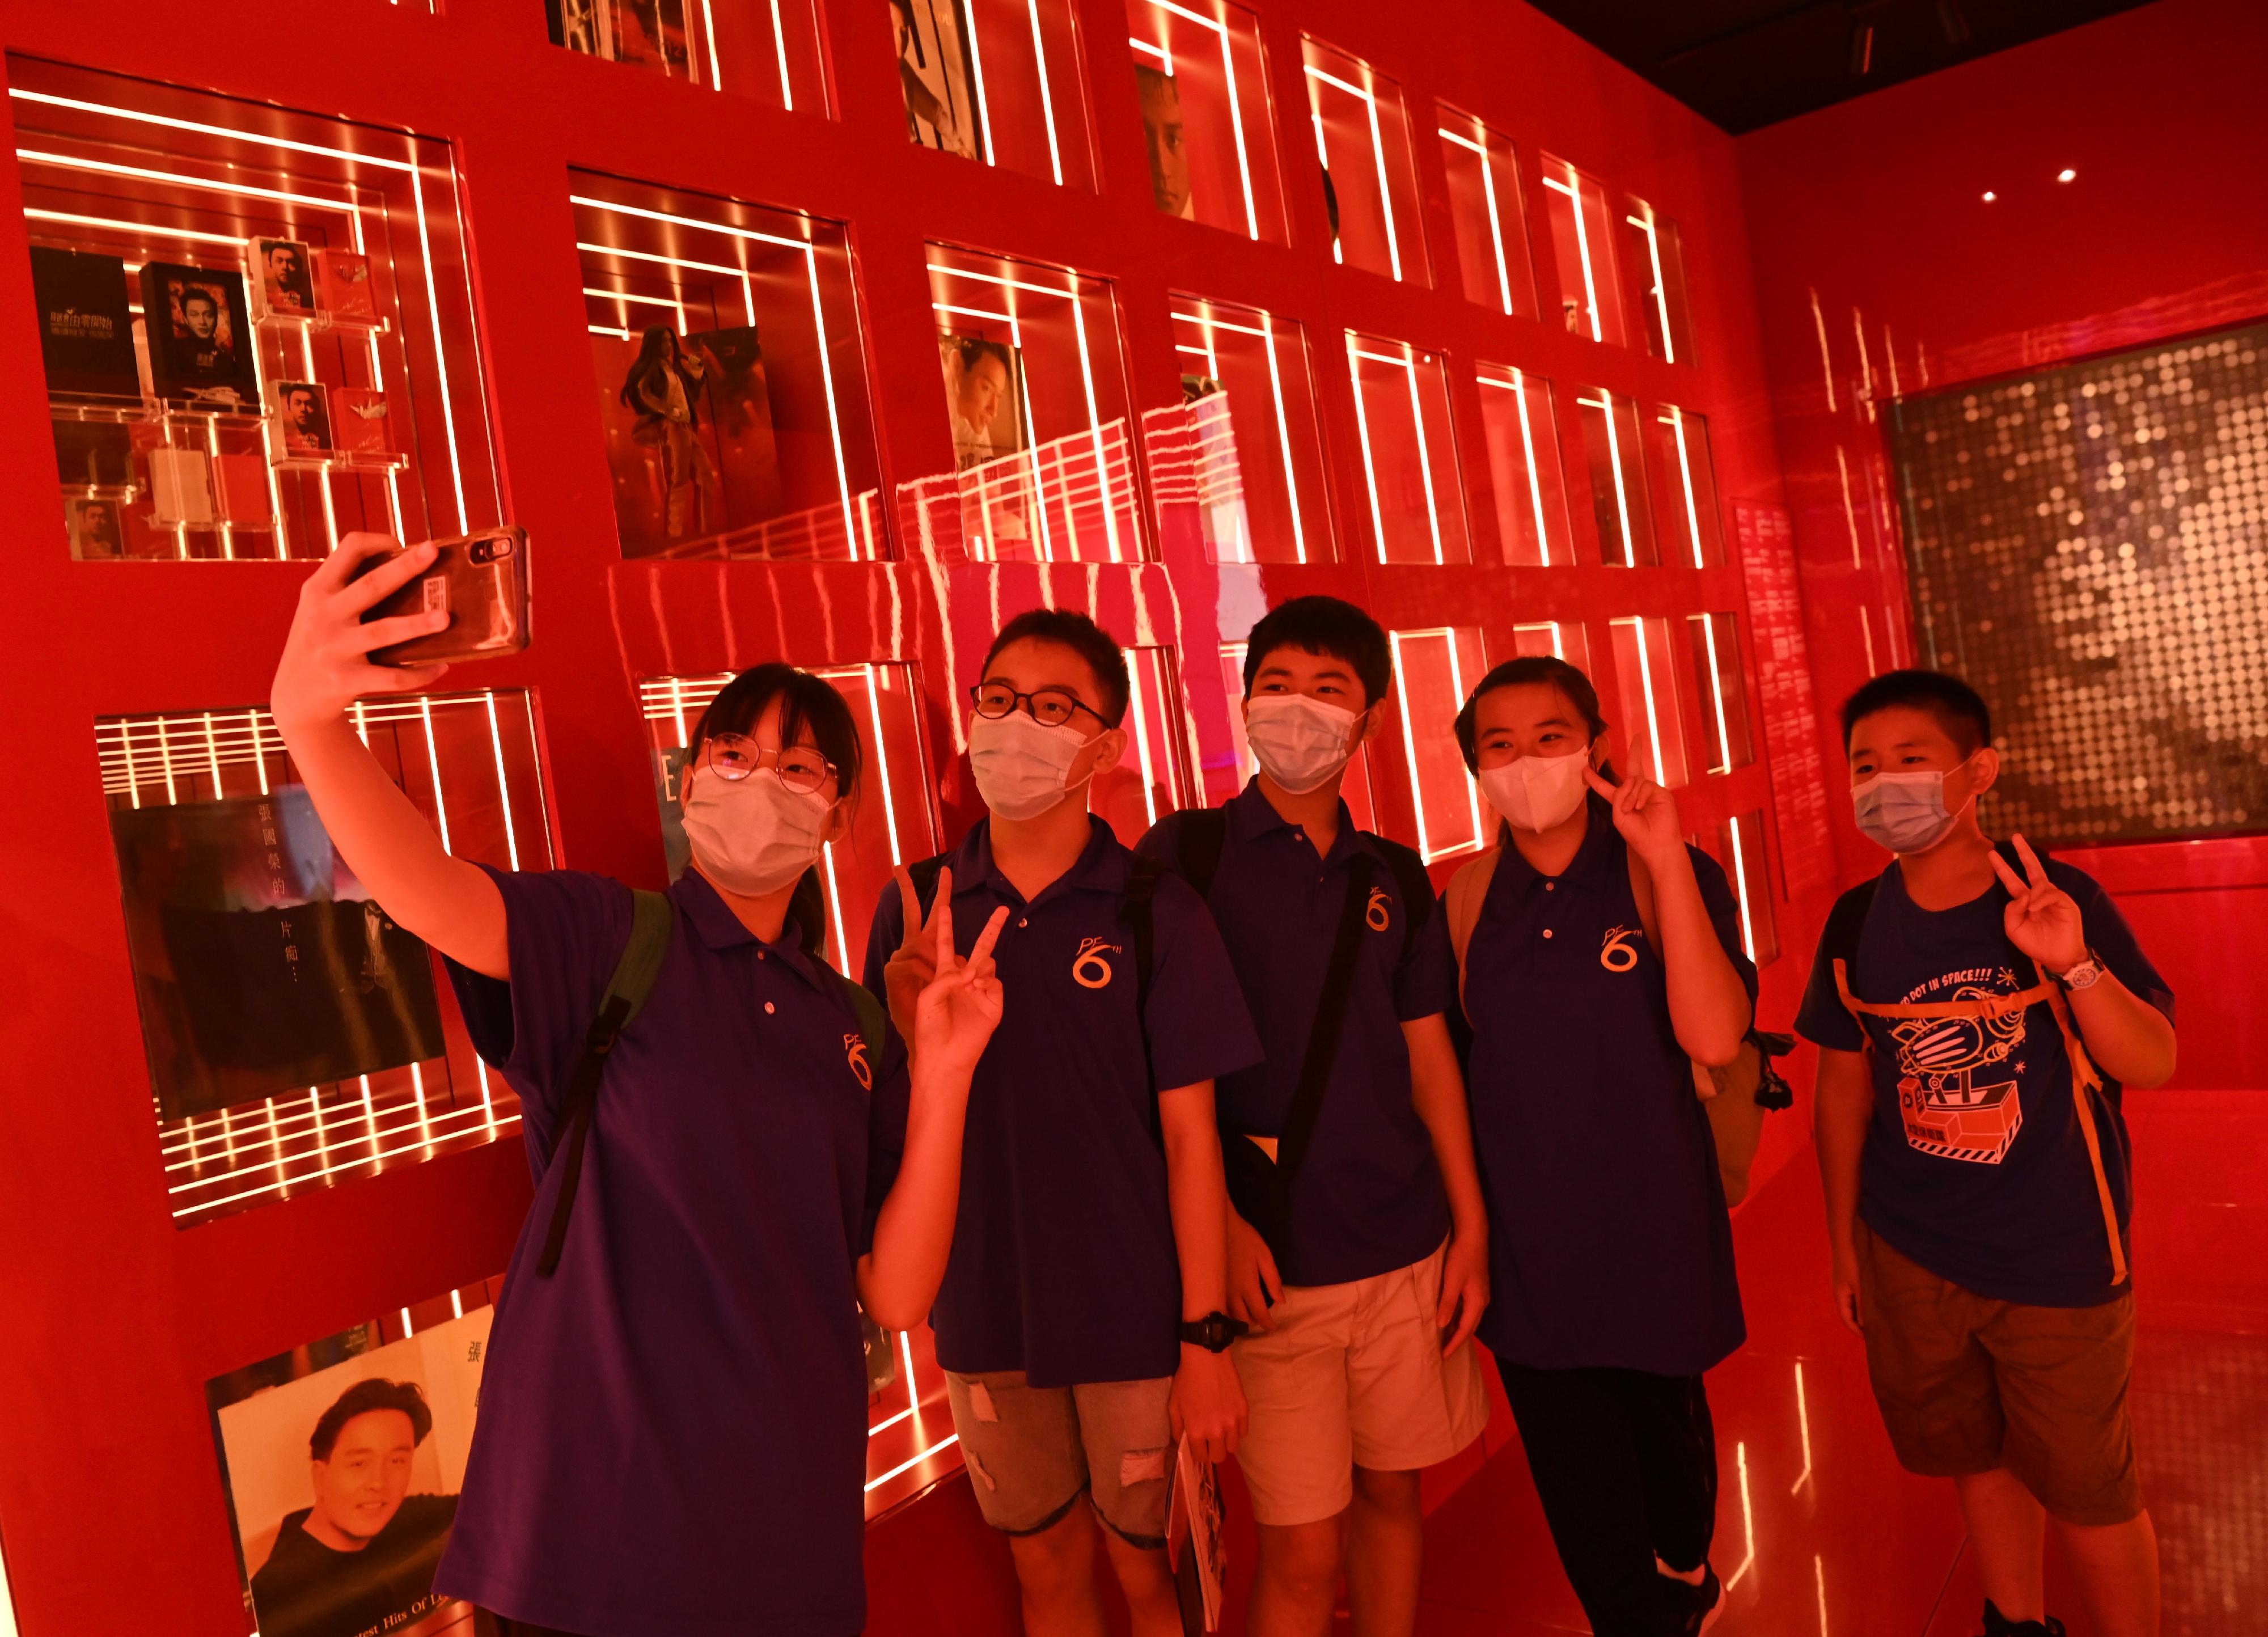 Hong Kong Heritage Museum's "Miss You Much Leslie Exhibition" has received overwhelming public response since its opening. The exhibition received its 300 000th visitor today (August 13). Photo shows visitors touring inside the exhibition.